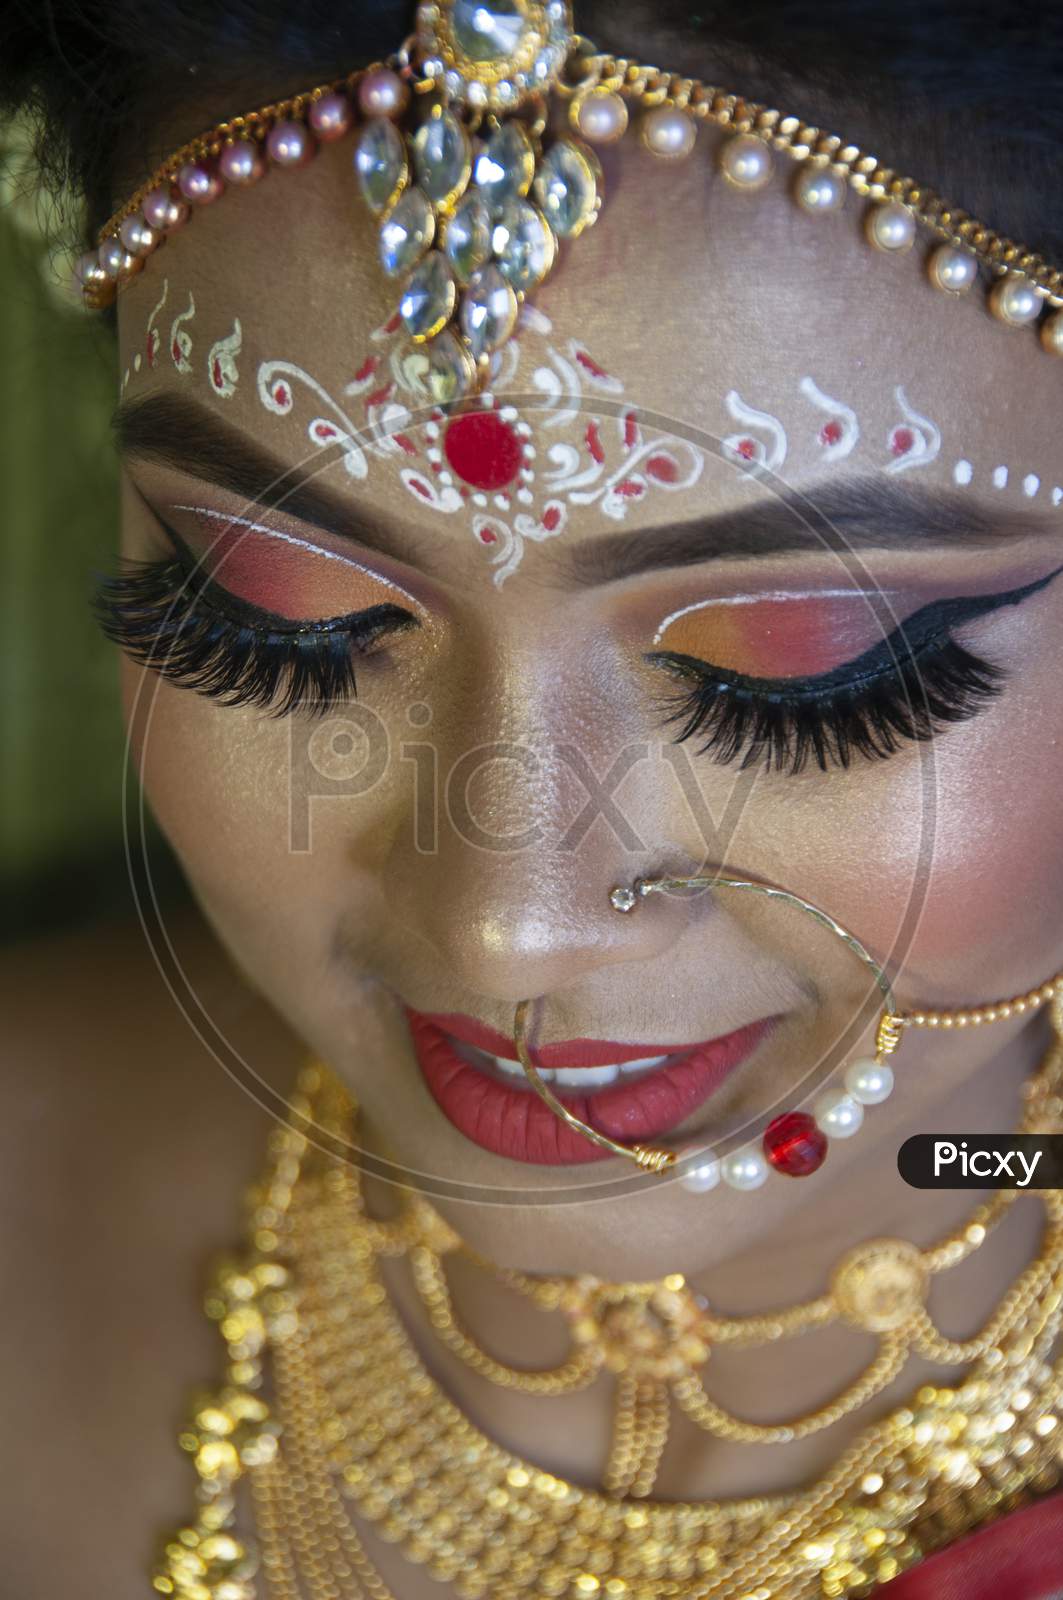 A Girl In Her Marriage Day Showing Her Eye Makeup